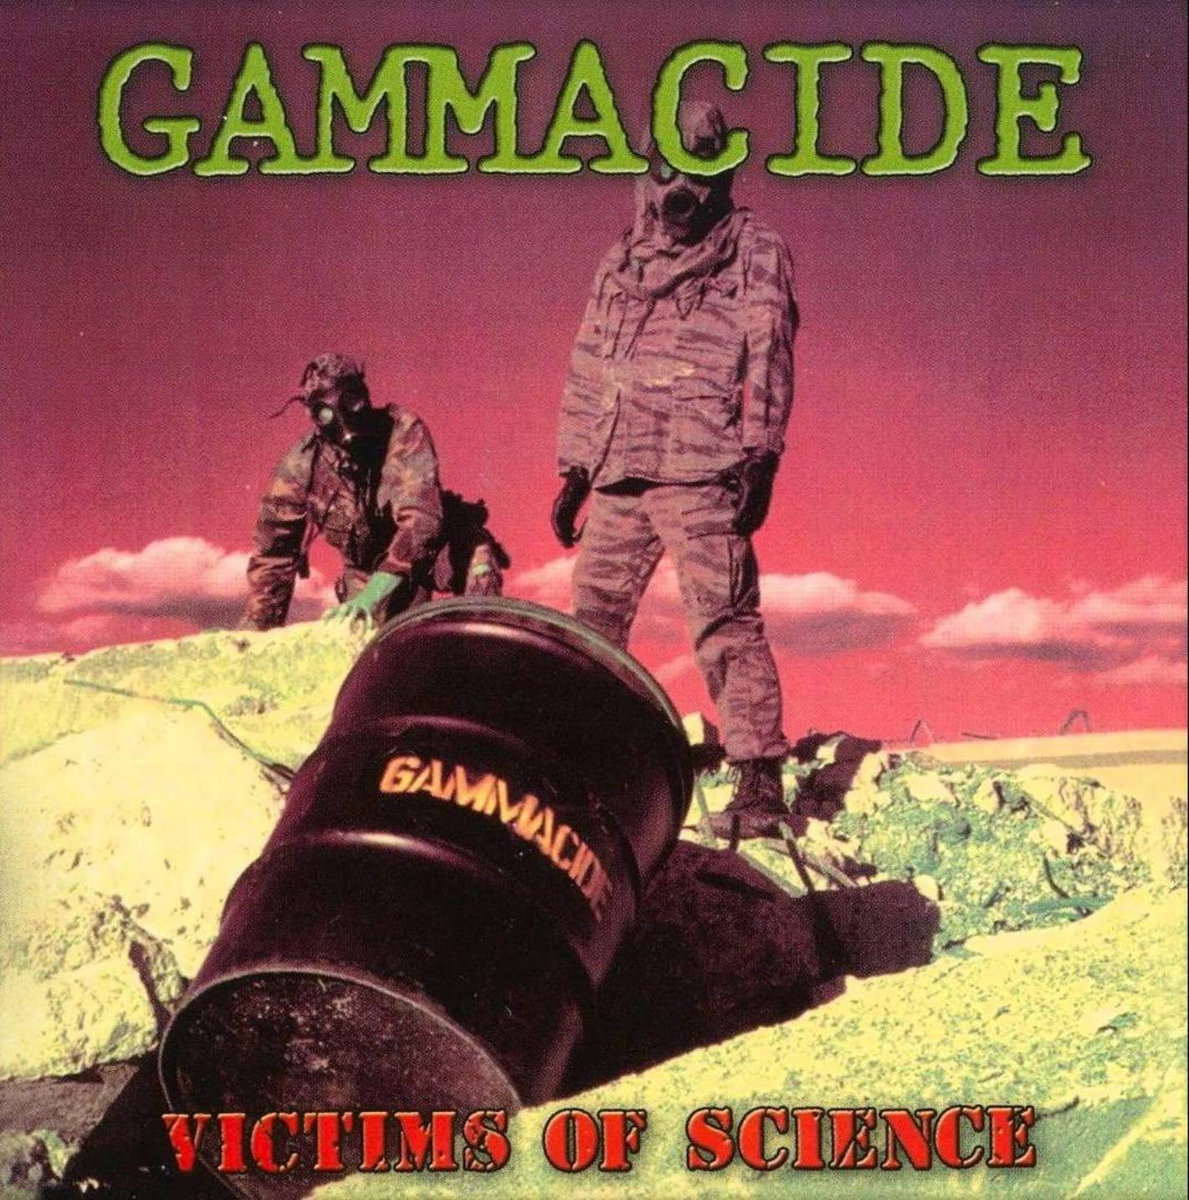 Gammacide - "Victims of Science" - 1989